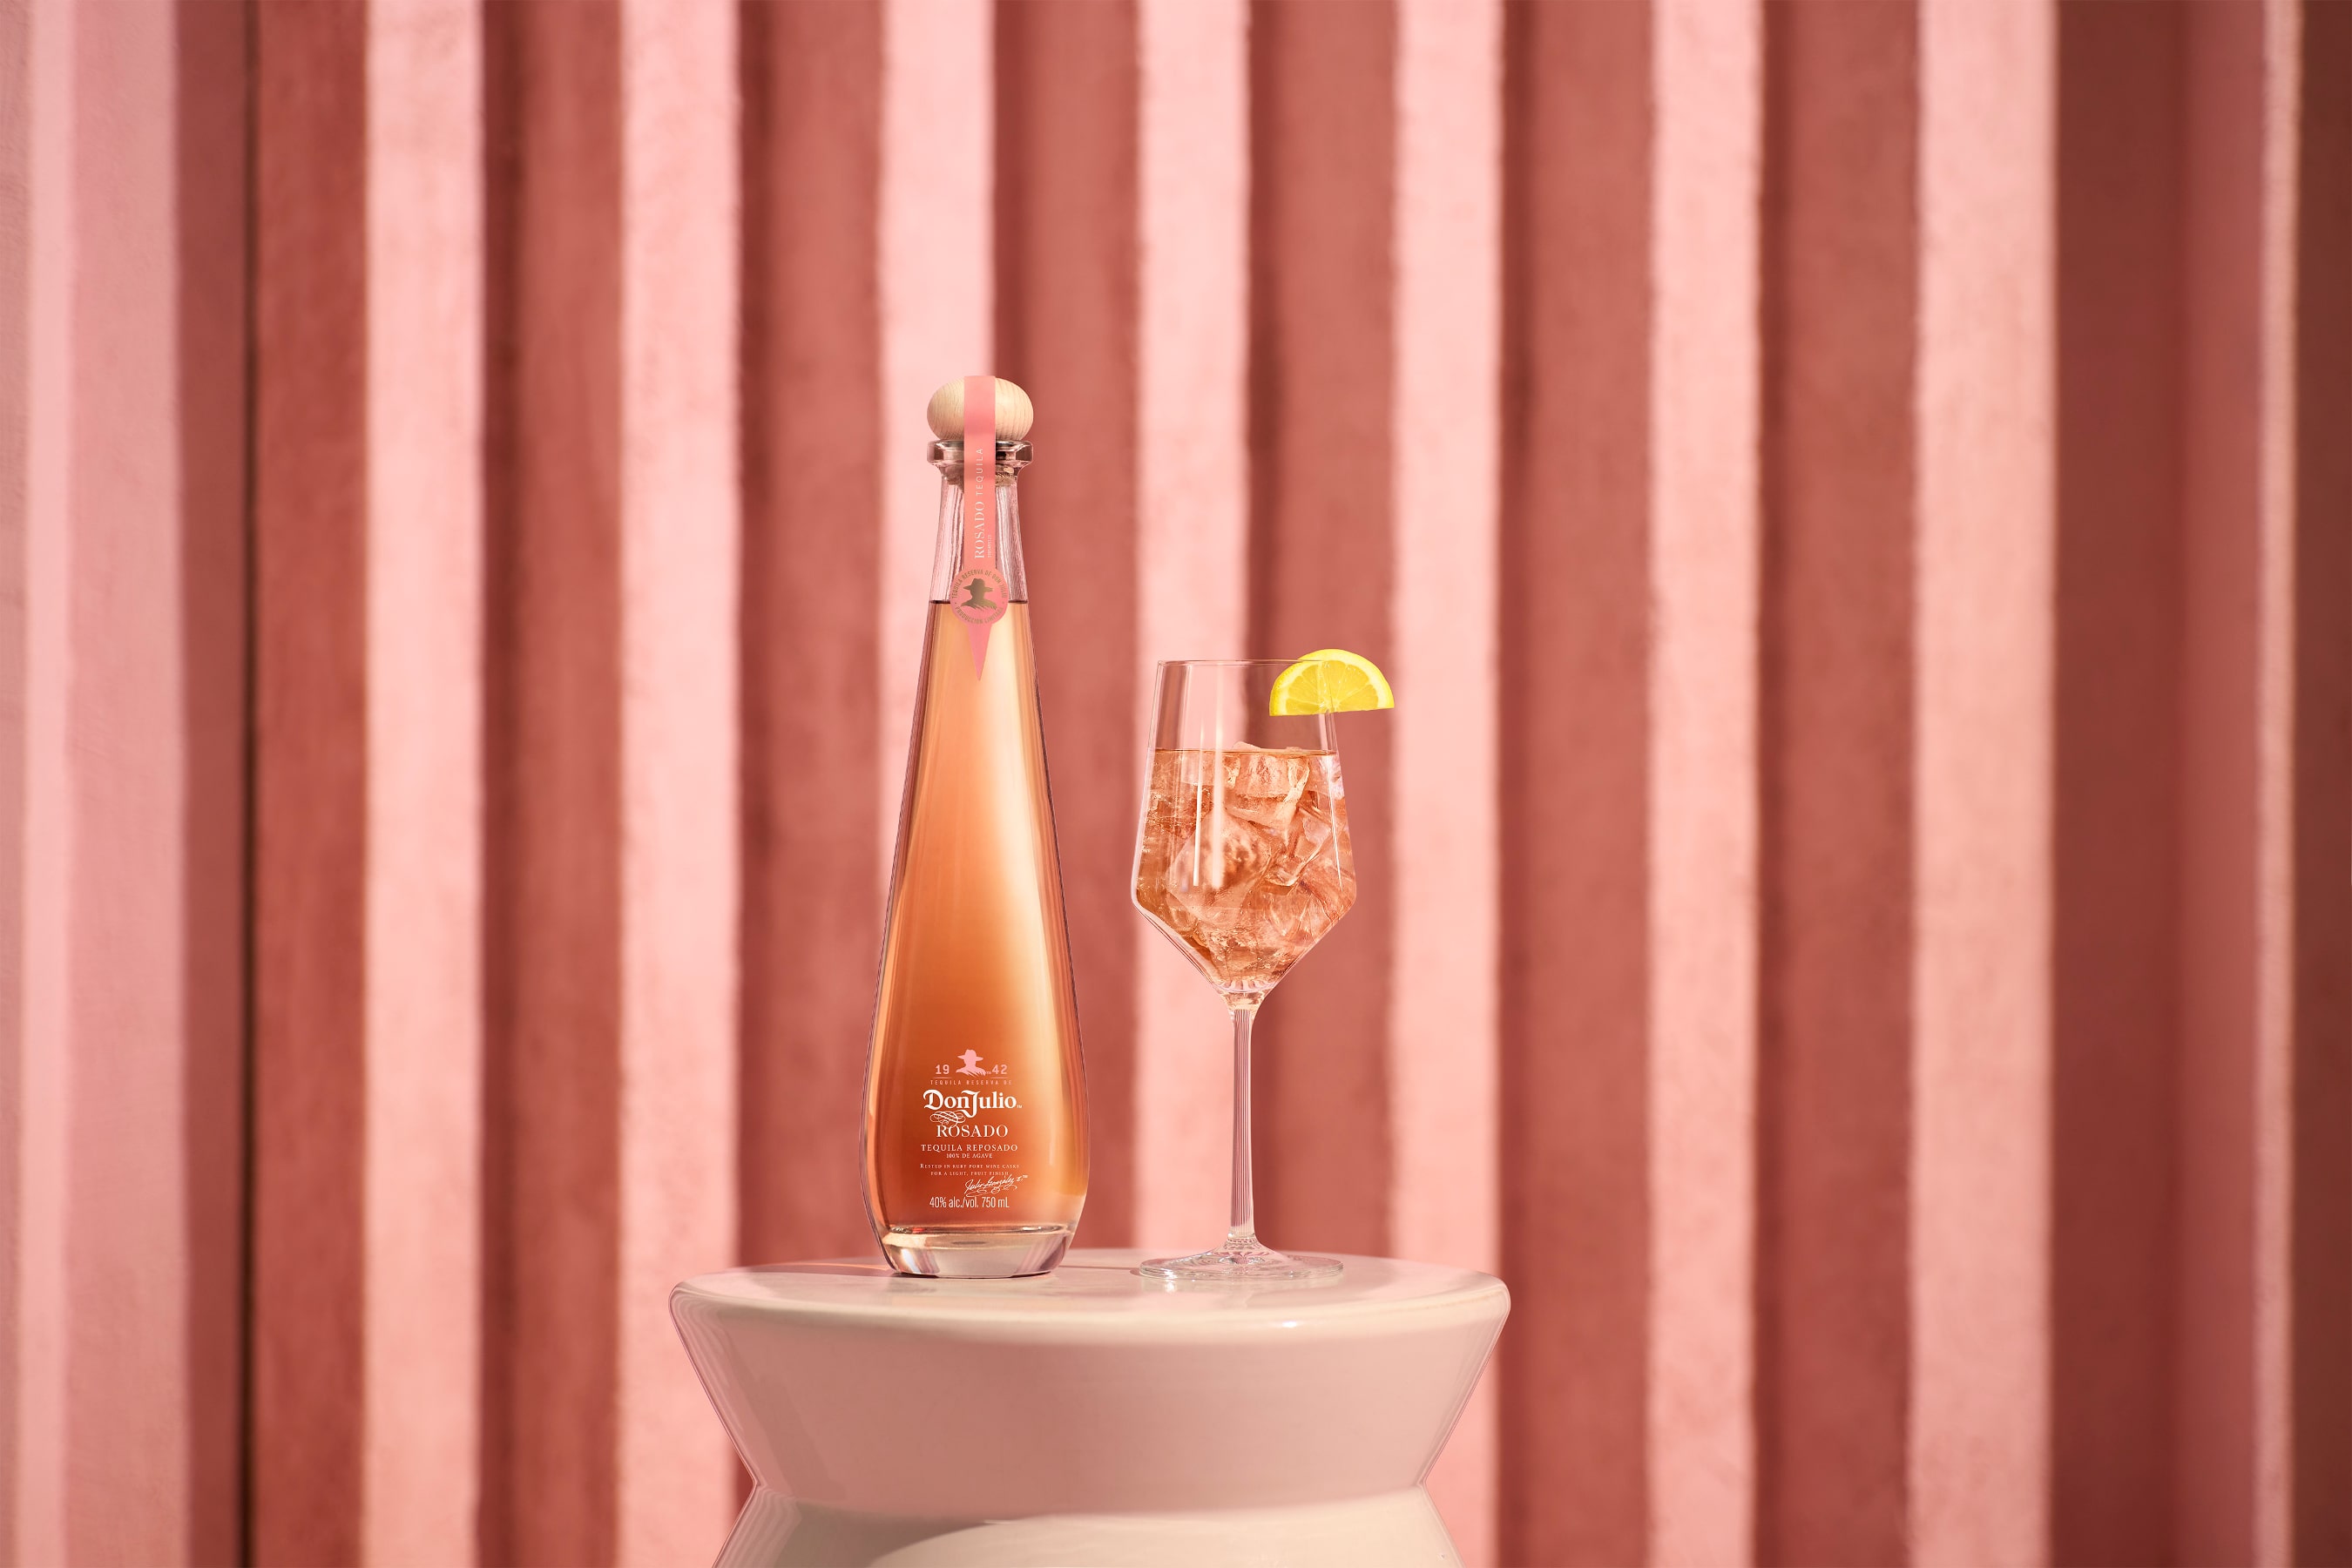 Introducing Tequila Don Julio Rosado, the latest addition to the brand’s growing portfolio of luxury offerings